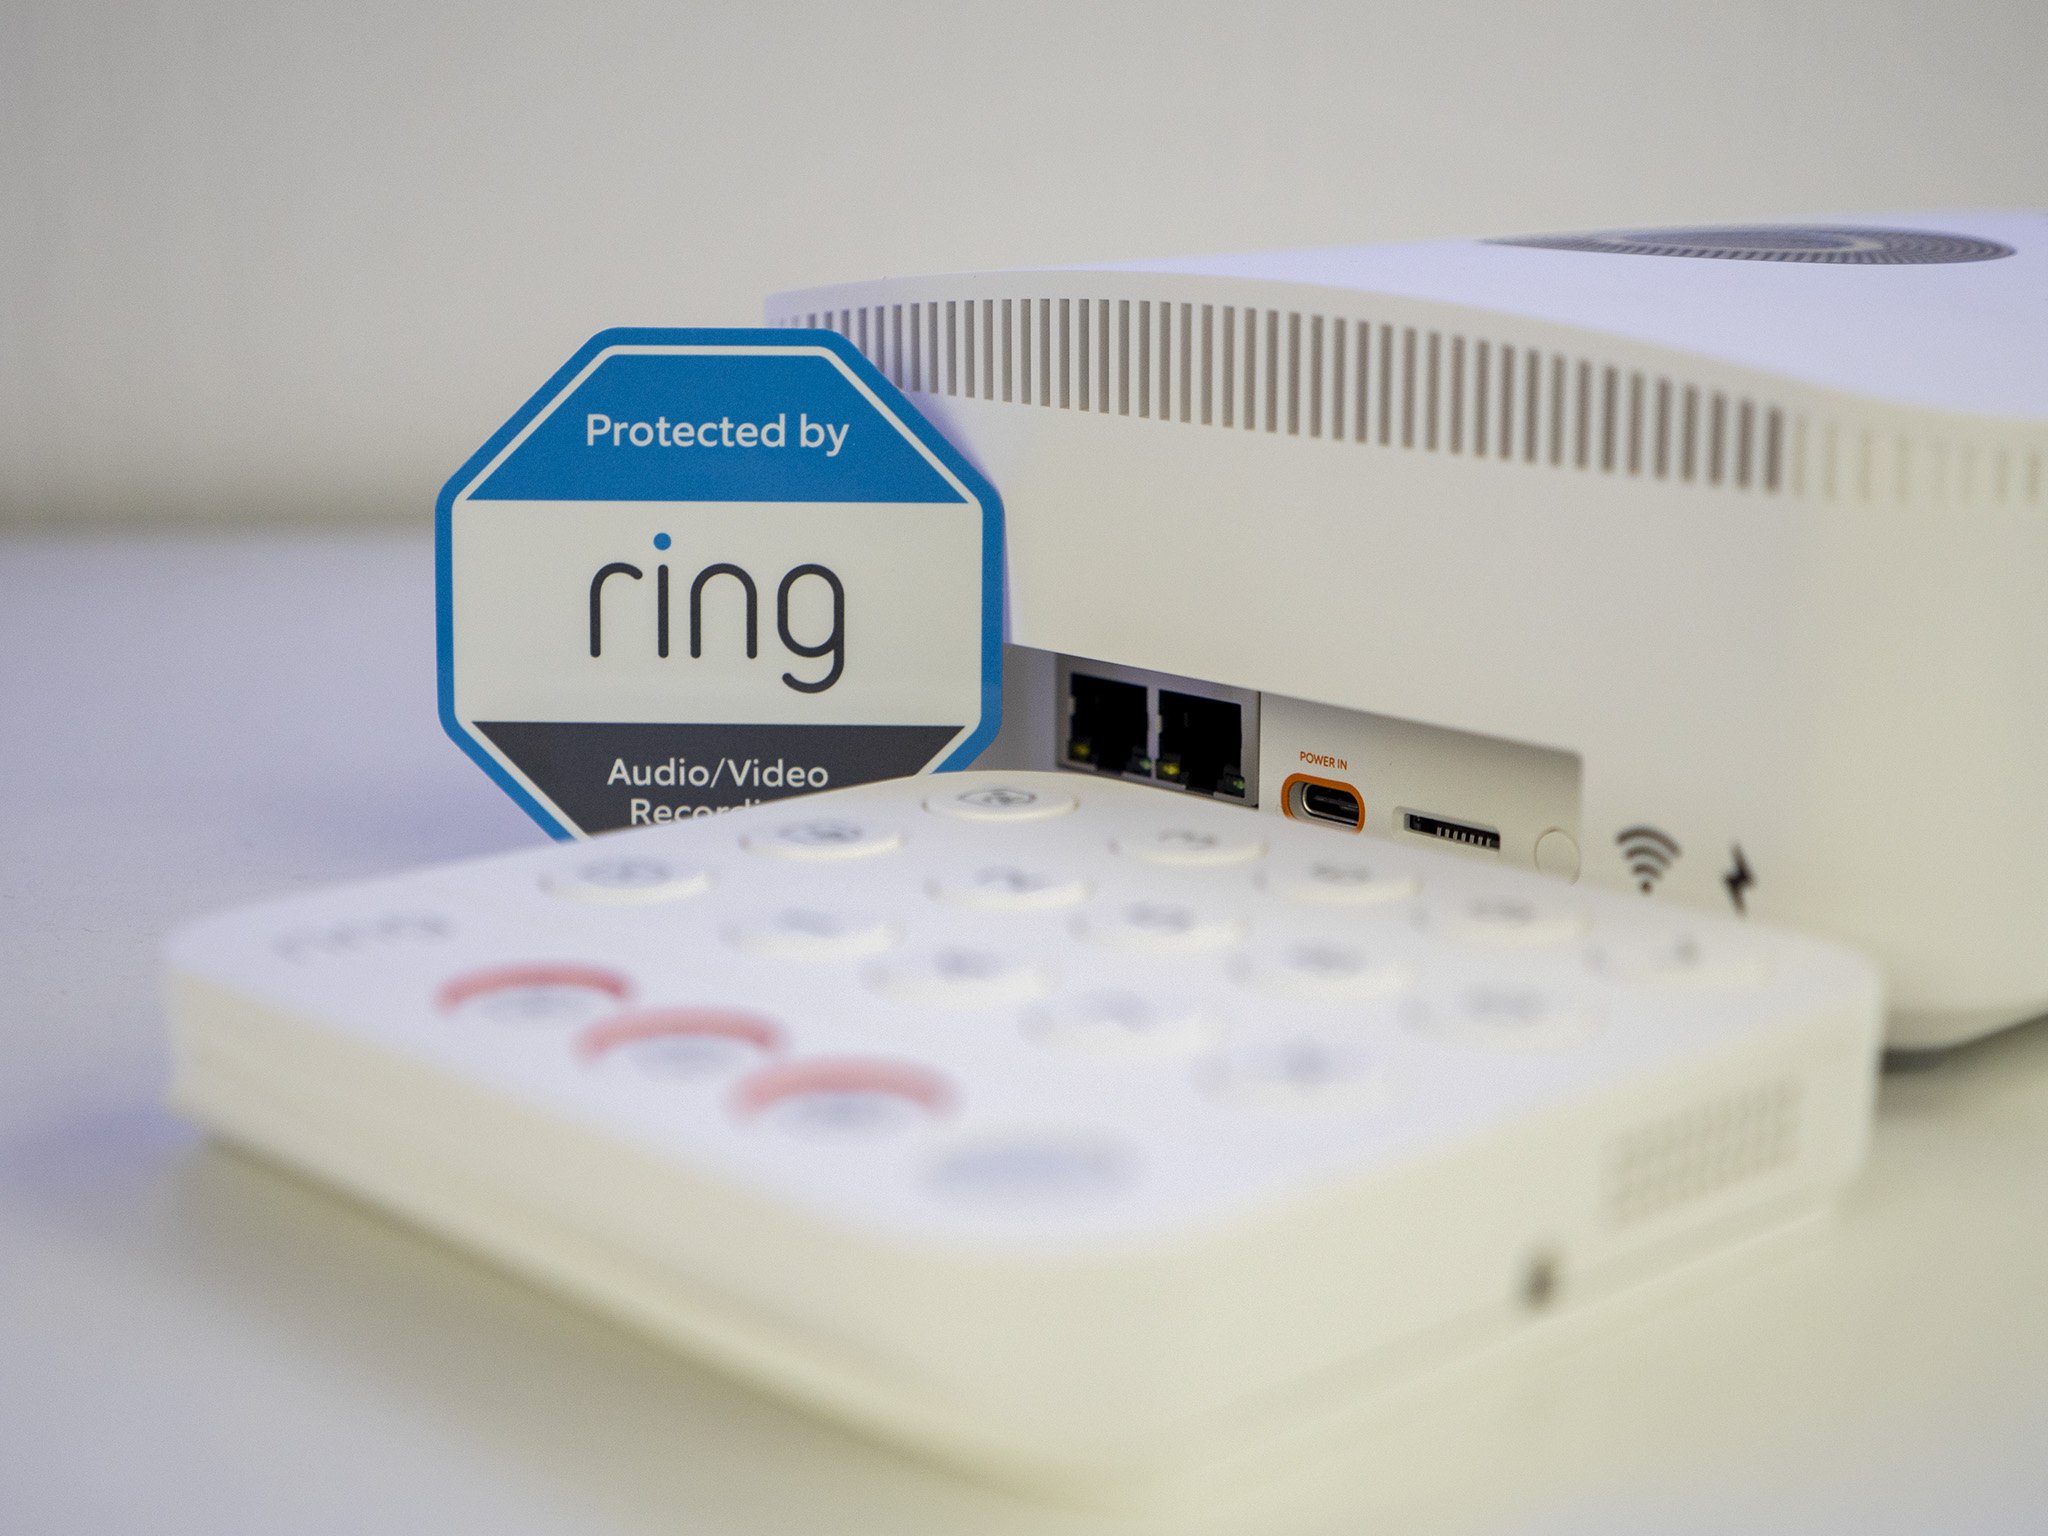 Ring puts an Eero router inside its new home alarm system